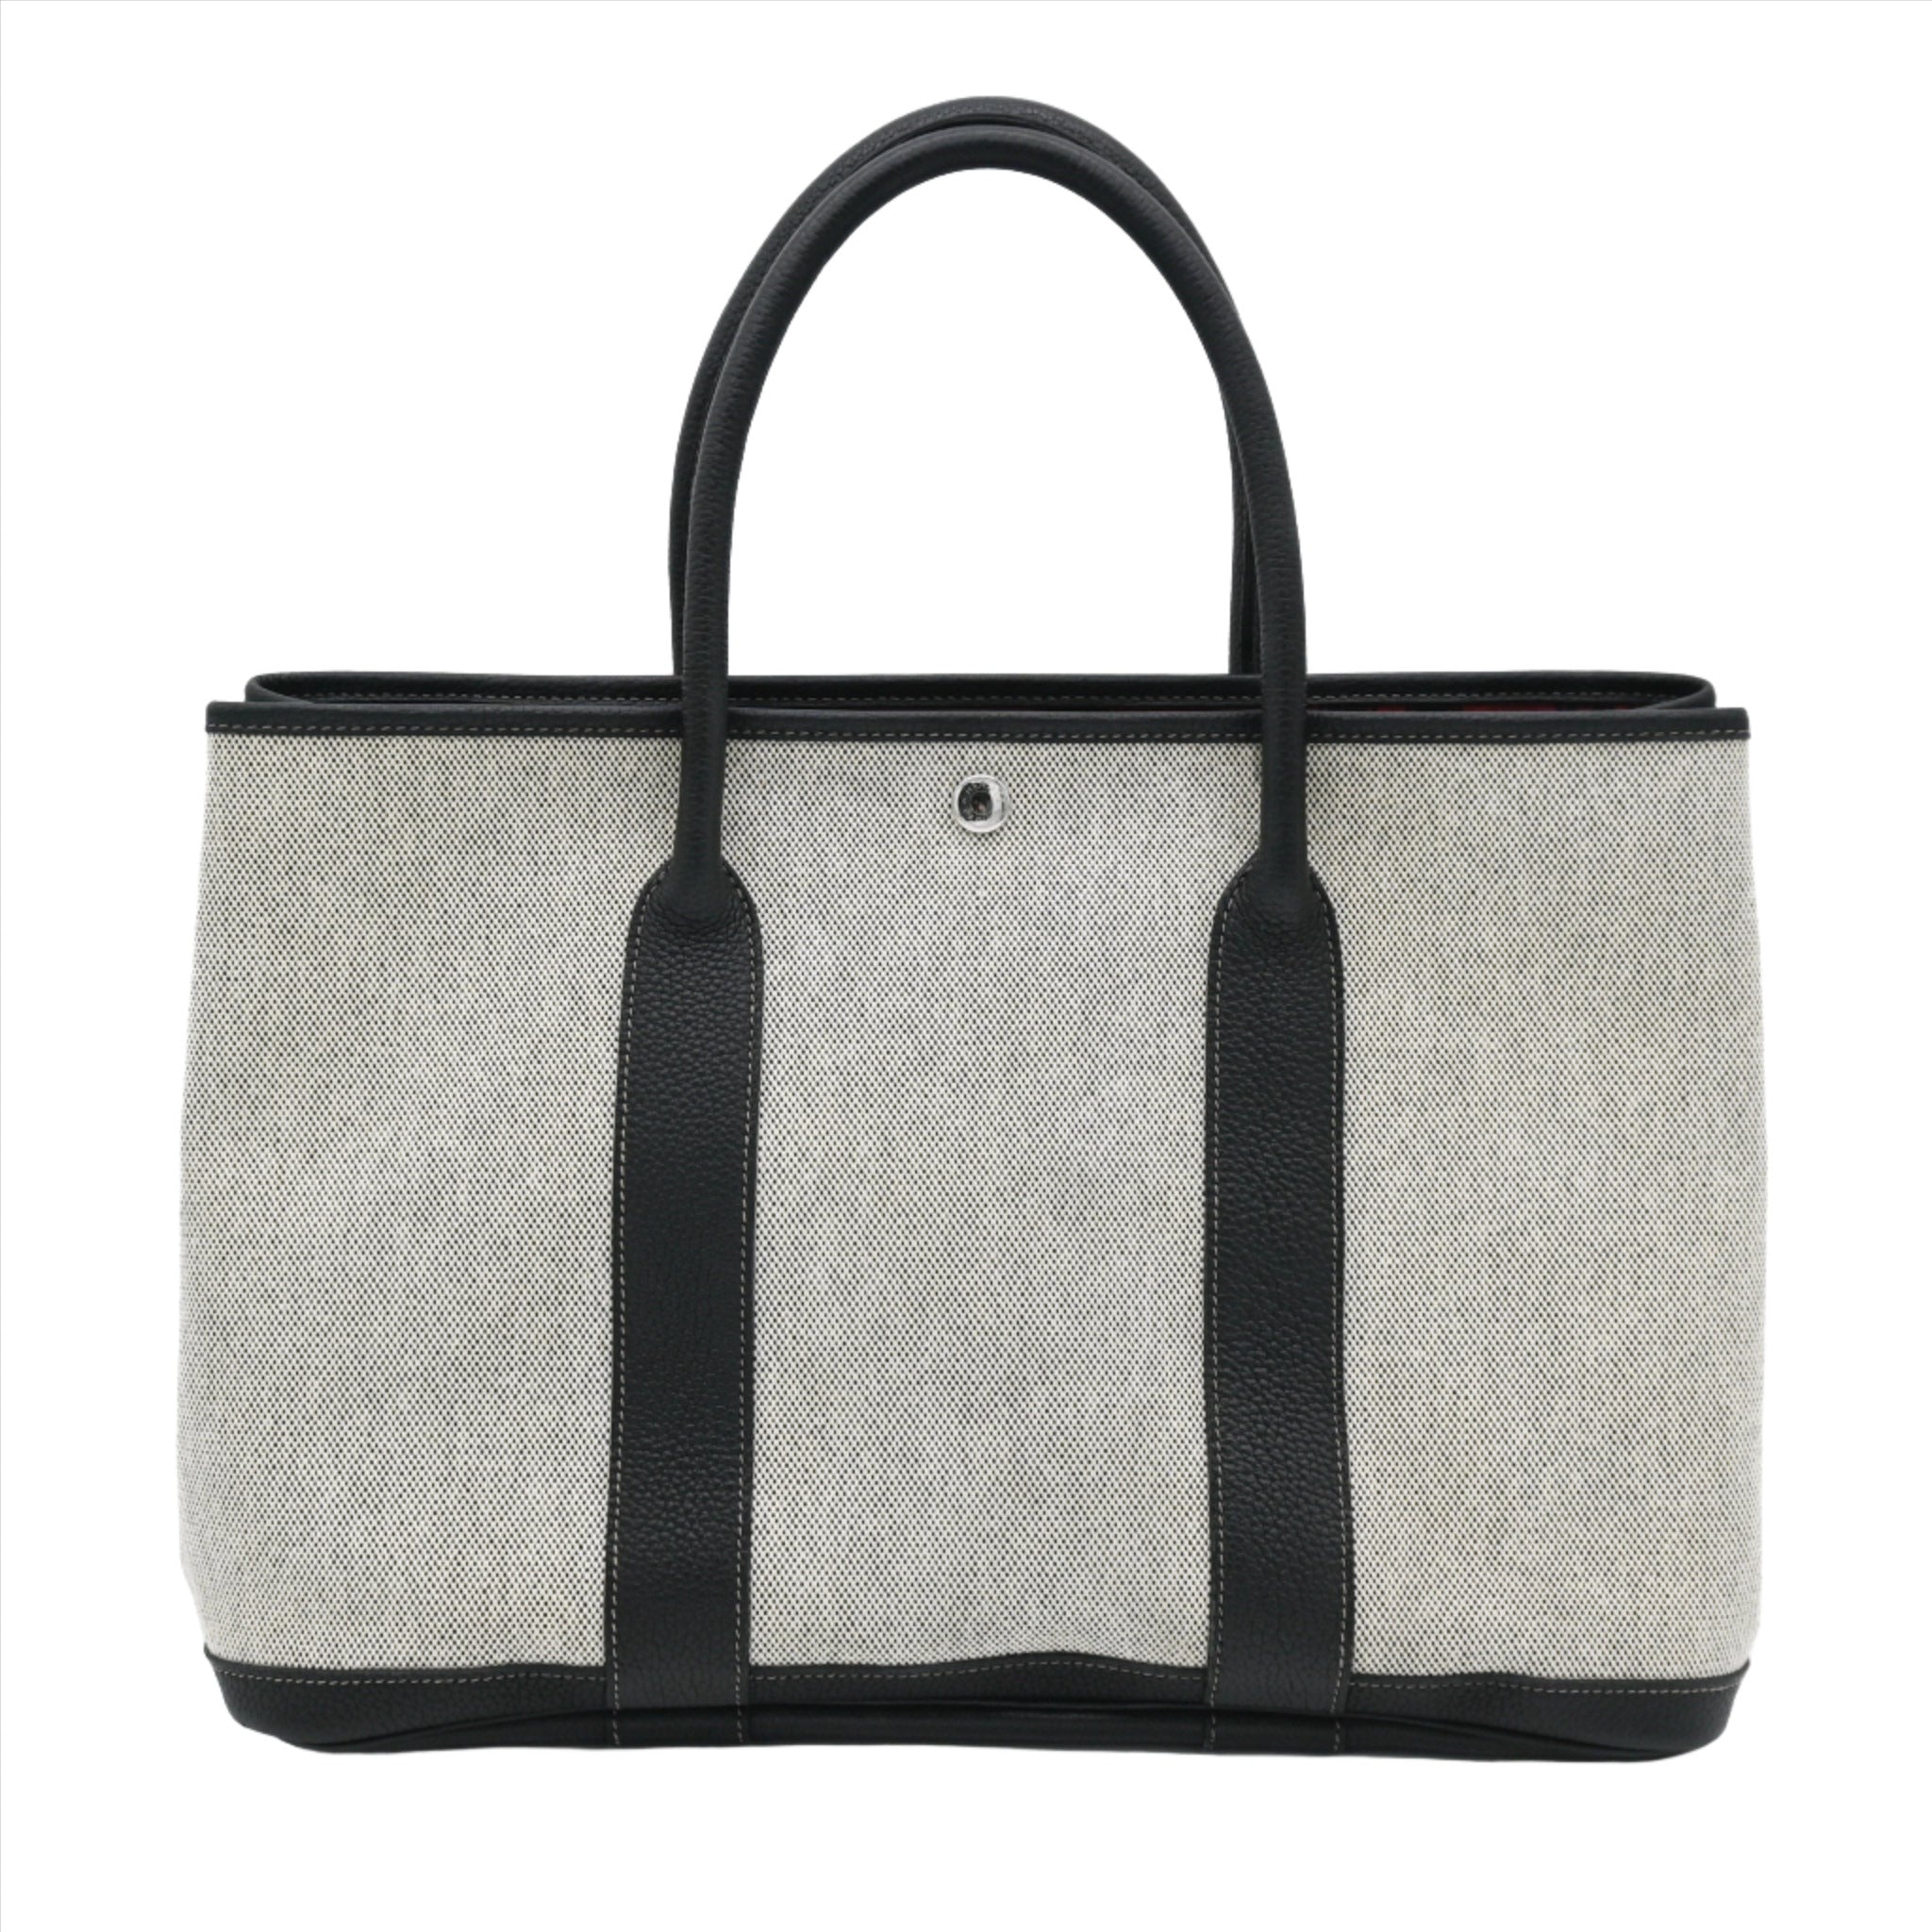 Hermes Garden Party 36 MM Tote Gray Black with Limited Edition Interior - Vault 55 | Preowned Designer Handbags